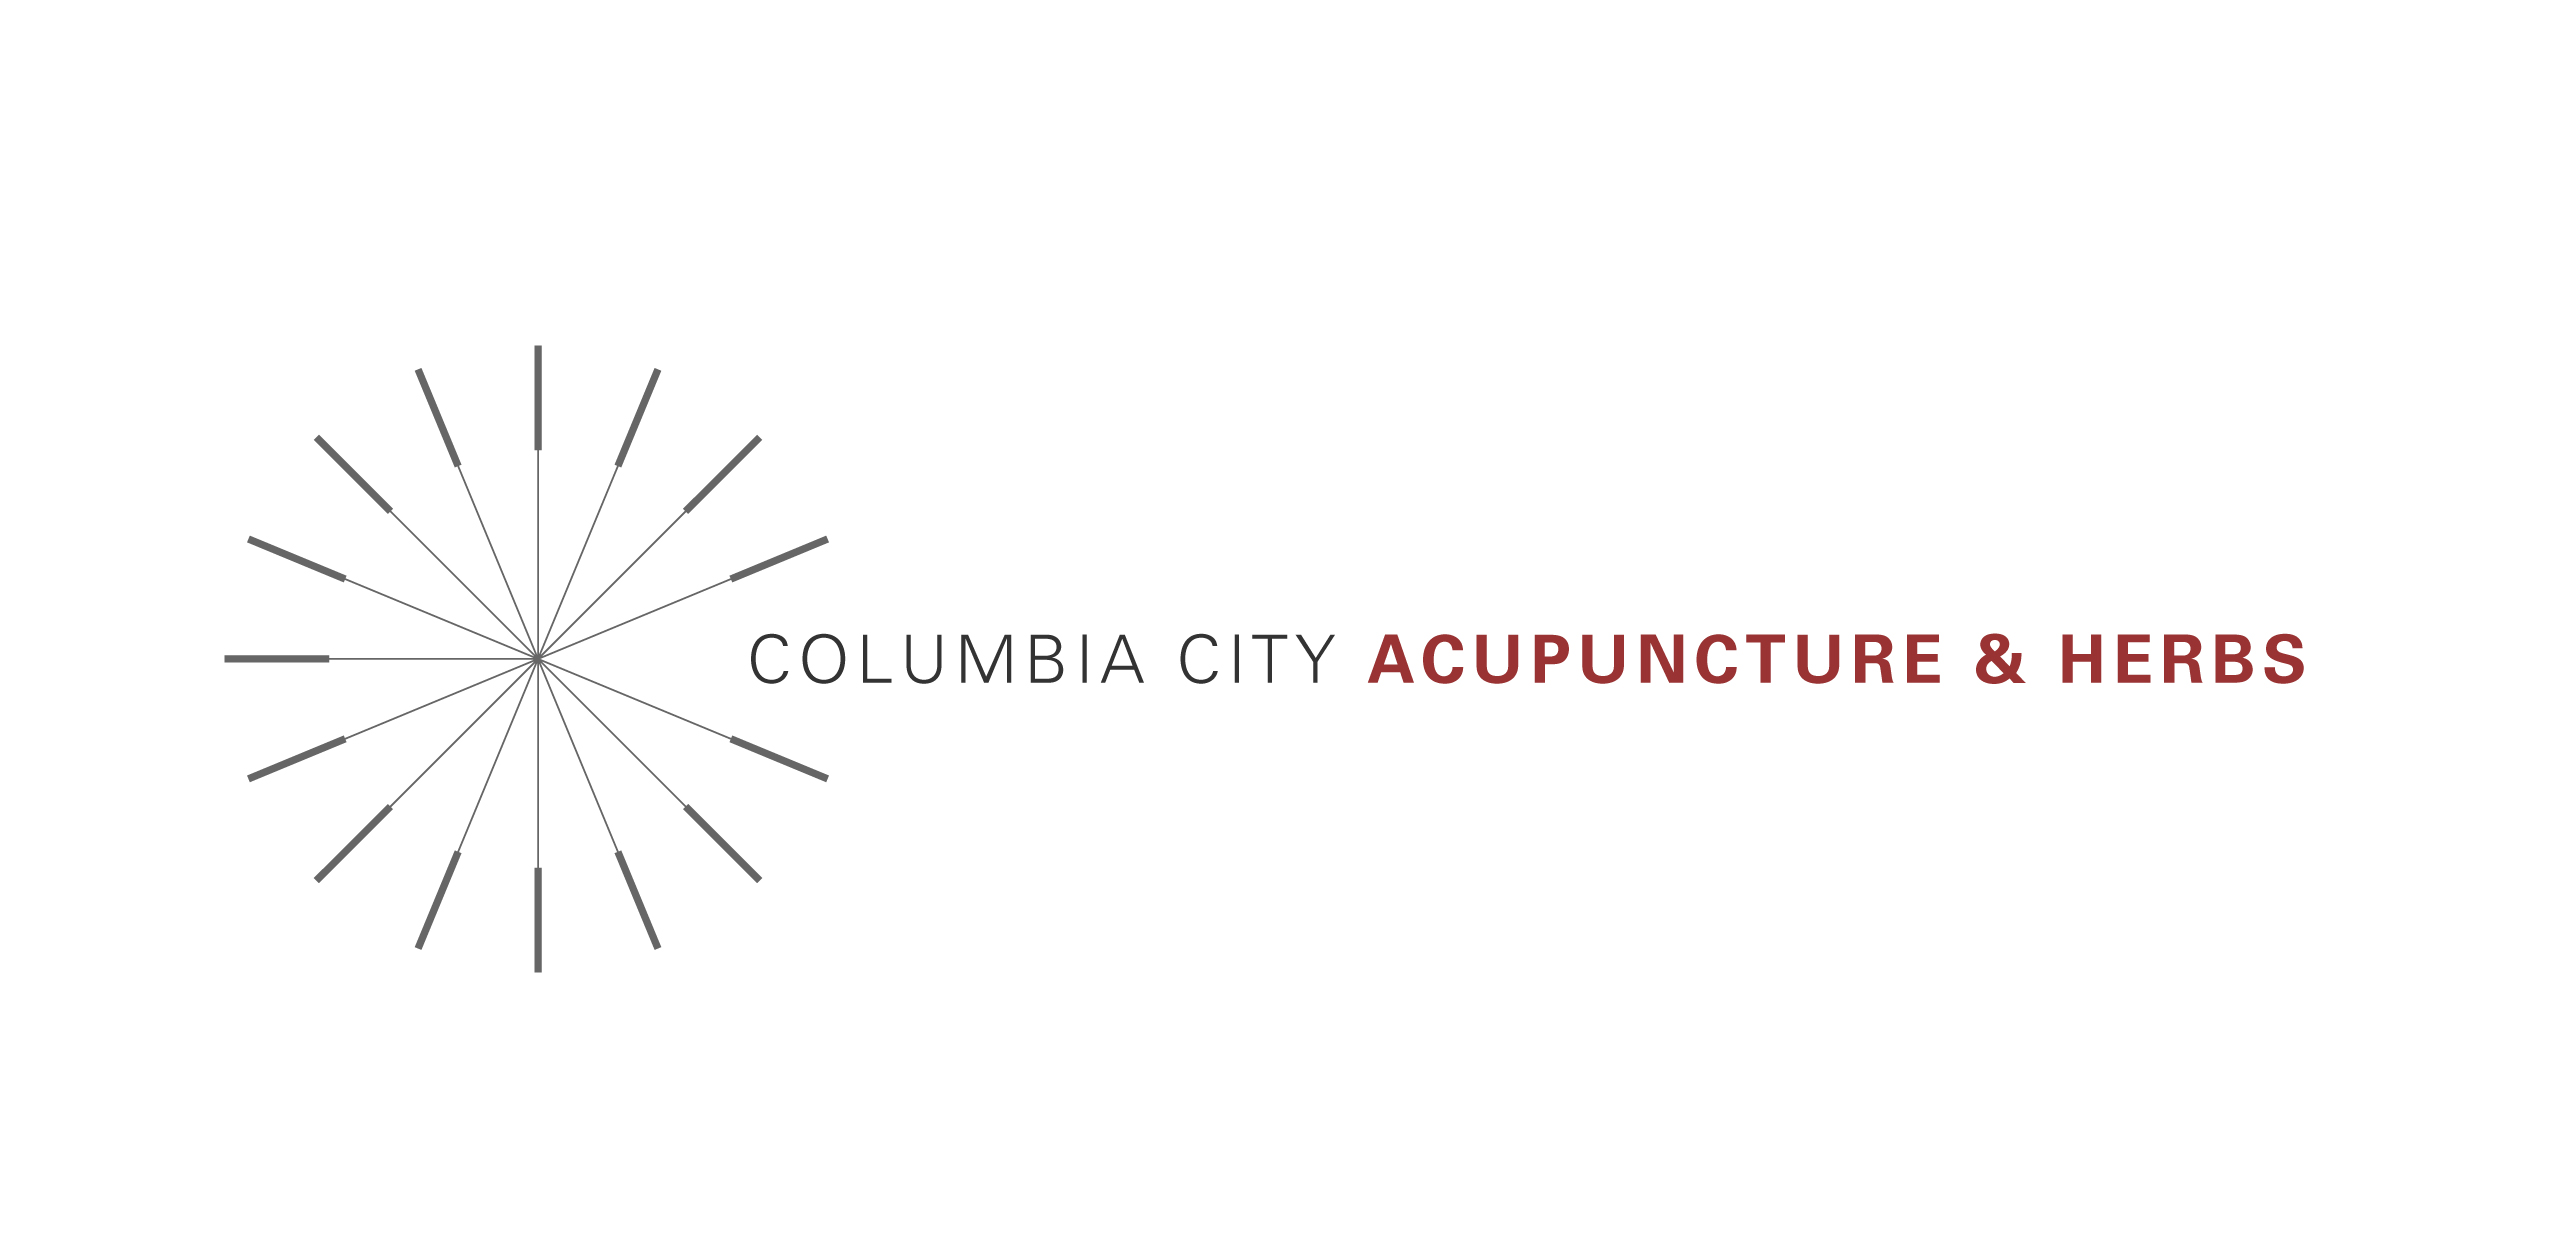 Columbia City Acupuncture and Herbs